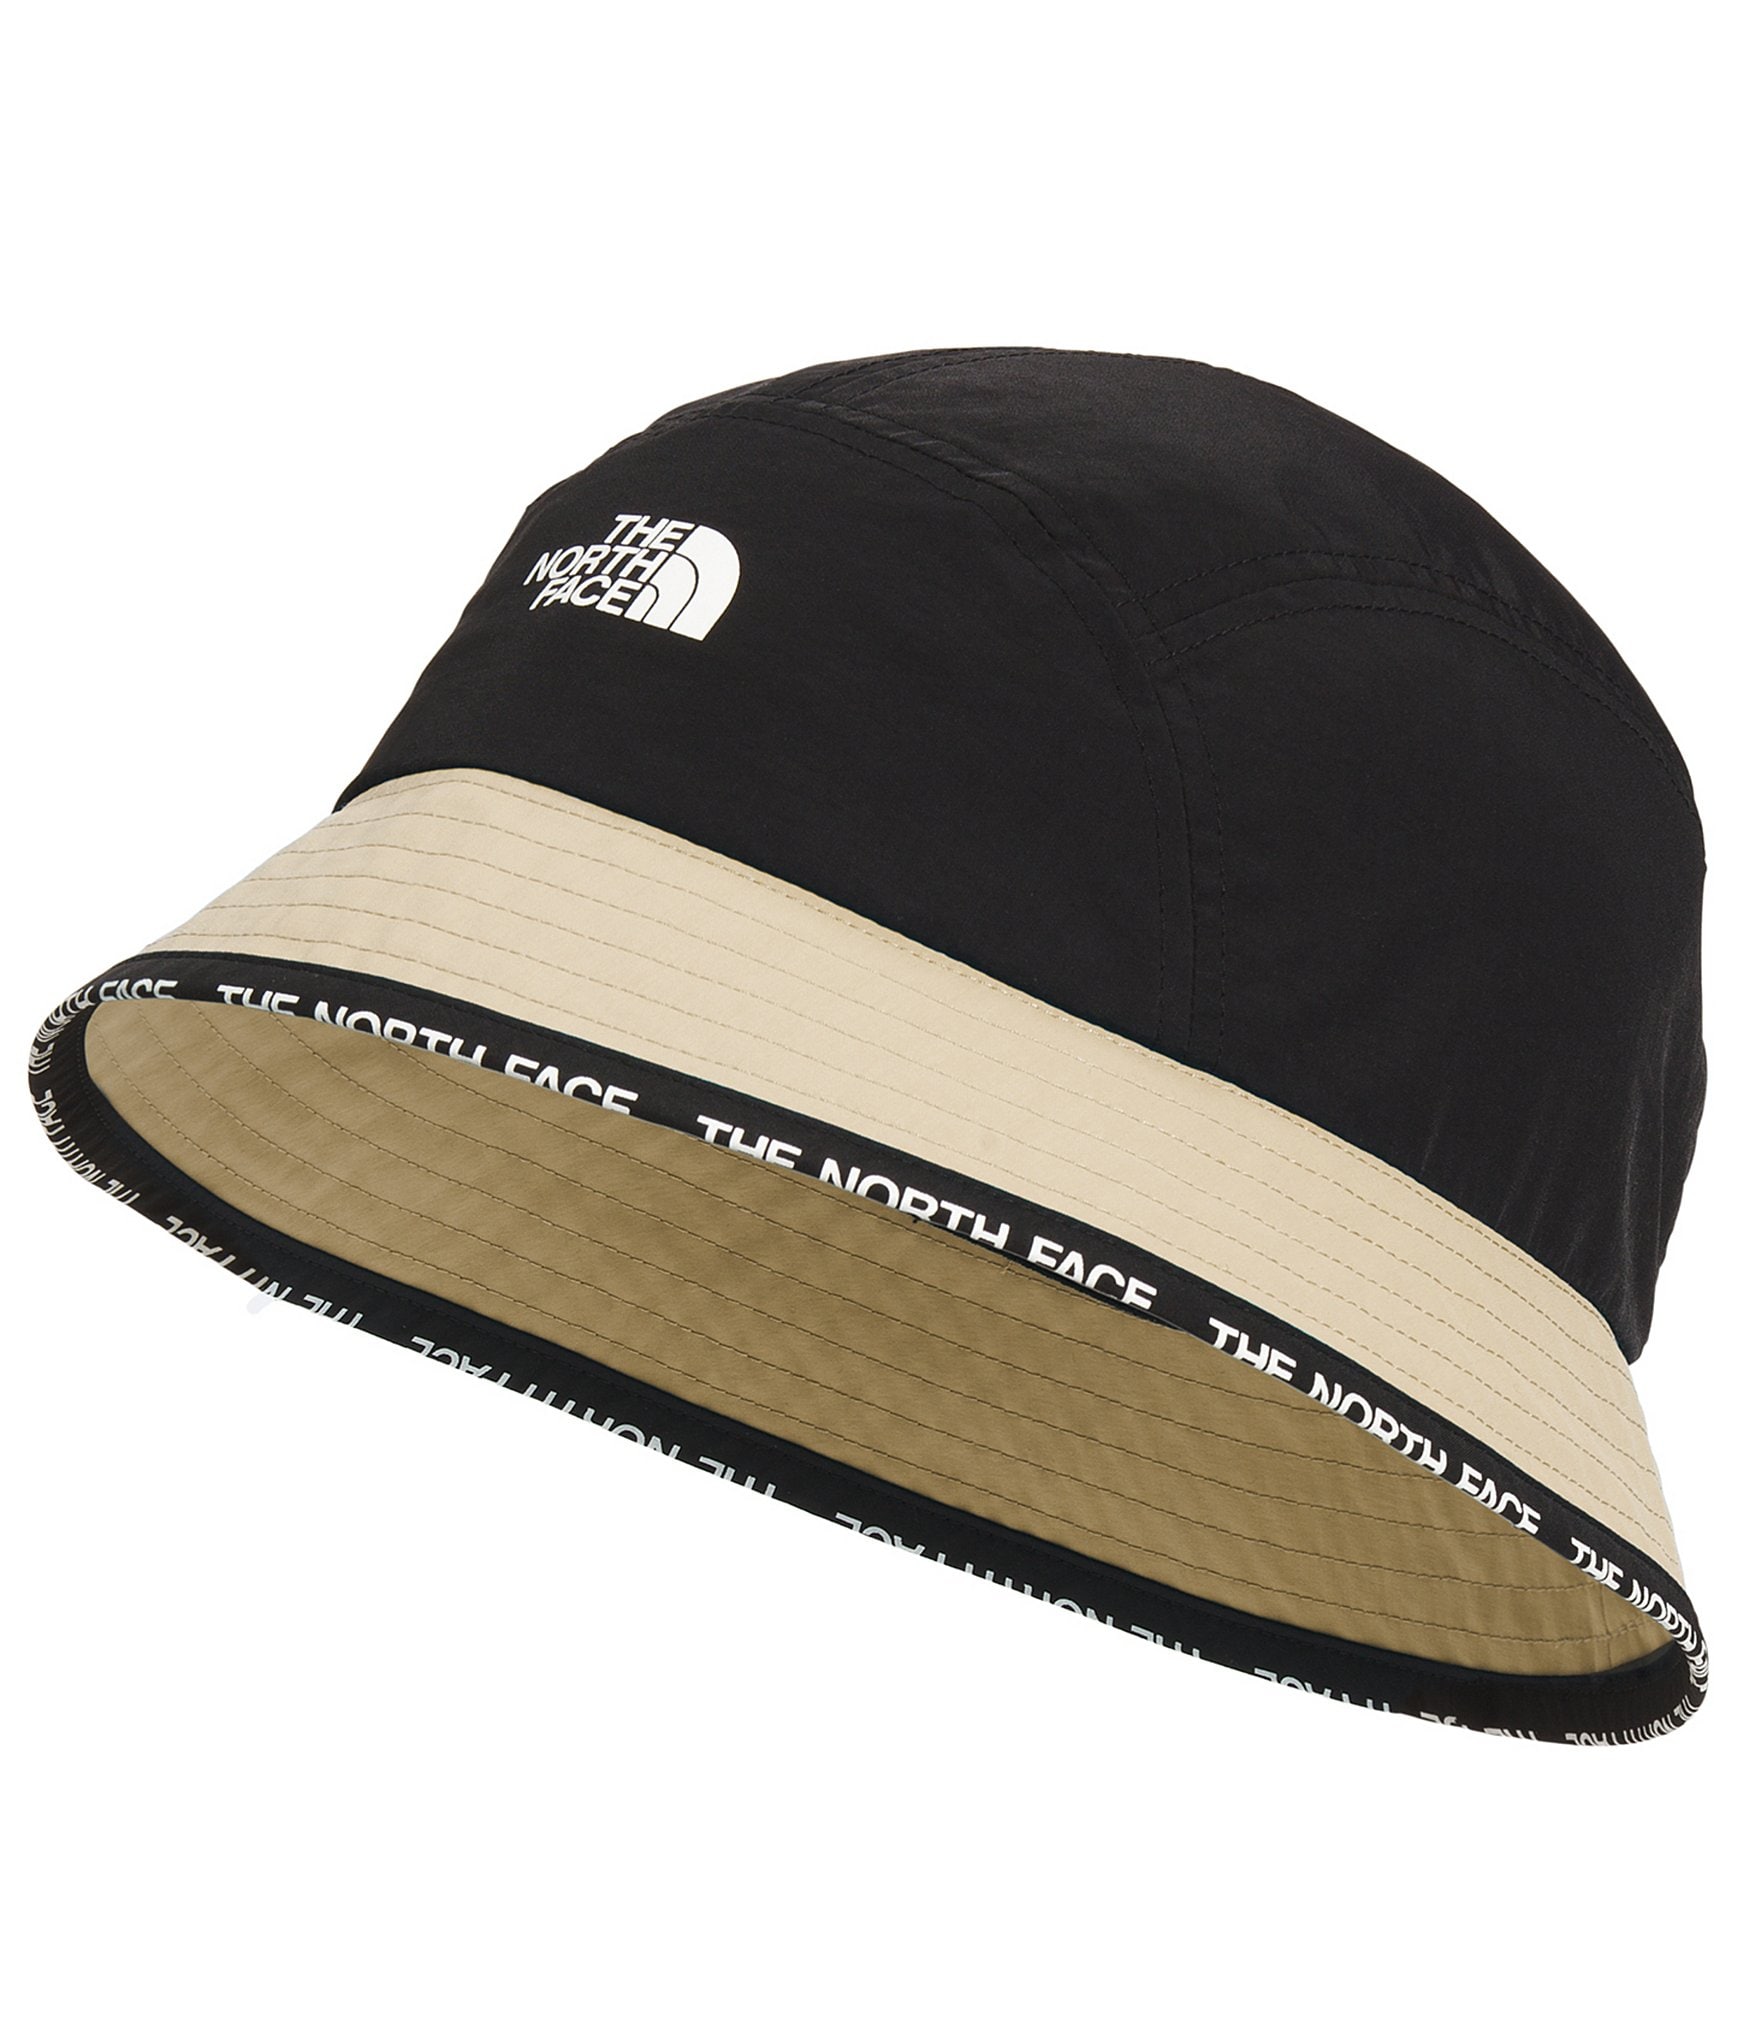 The North Face Cypress Bucket Hat - Gravel - Size S/M